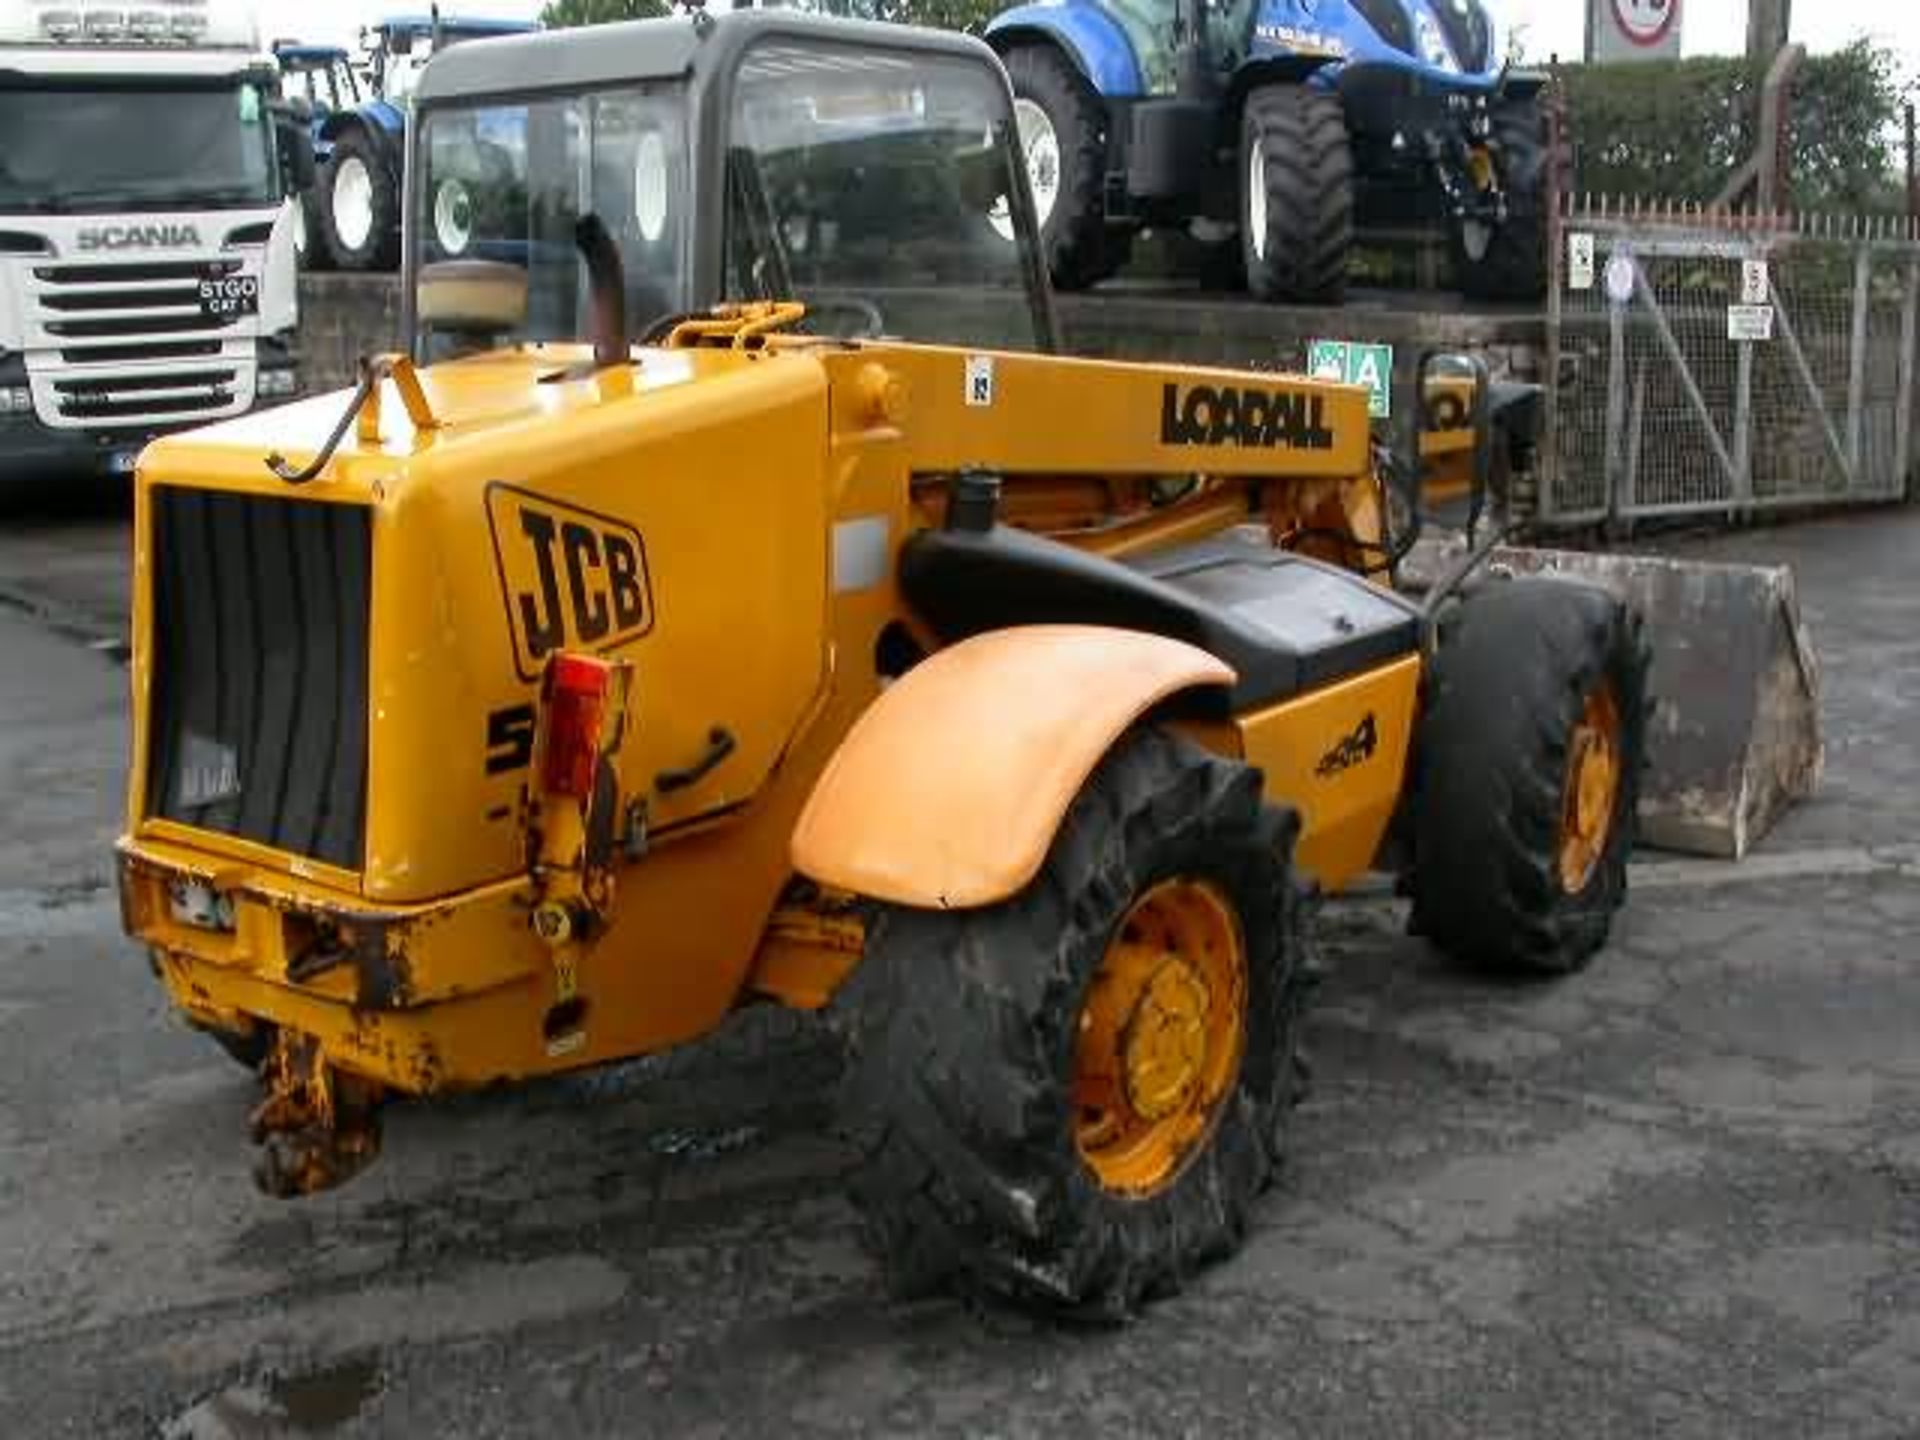 1996 Case JCB 526/55 with Bucket - Image 5 of 5